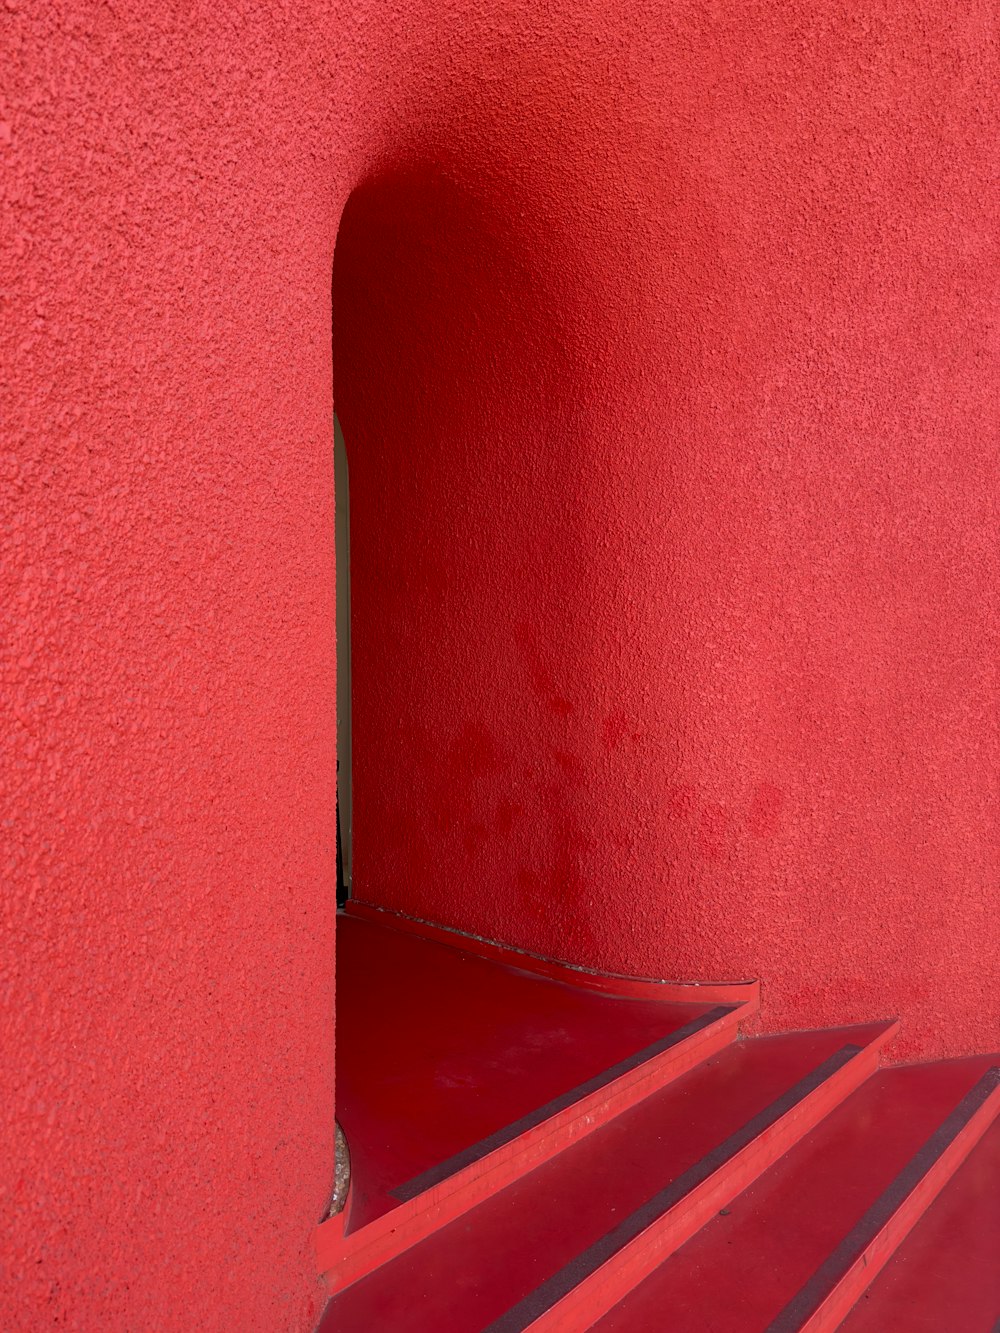 a red wall with a set of stairs leading up to it